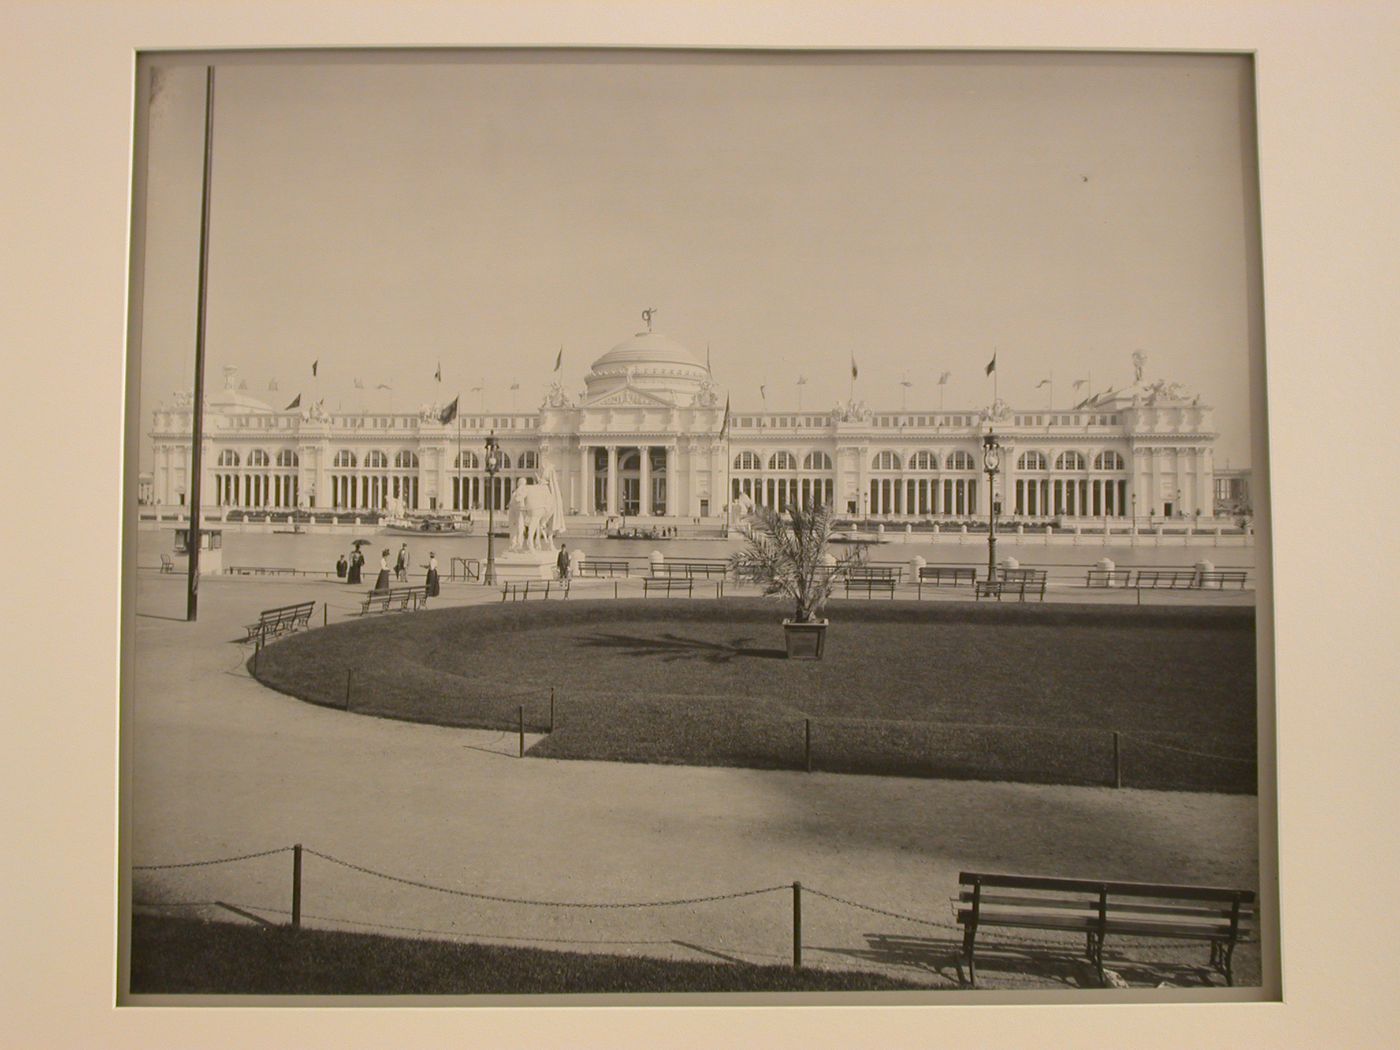 World's Columbian Exposition, Agriculture Building